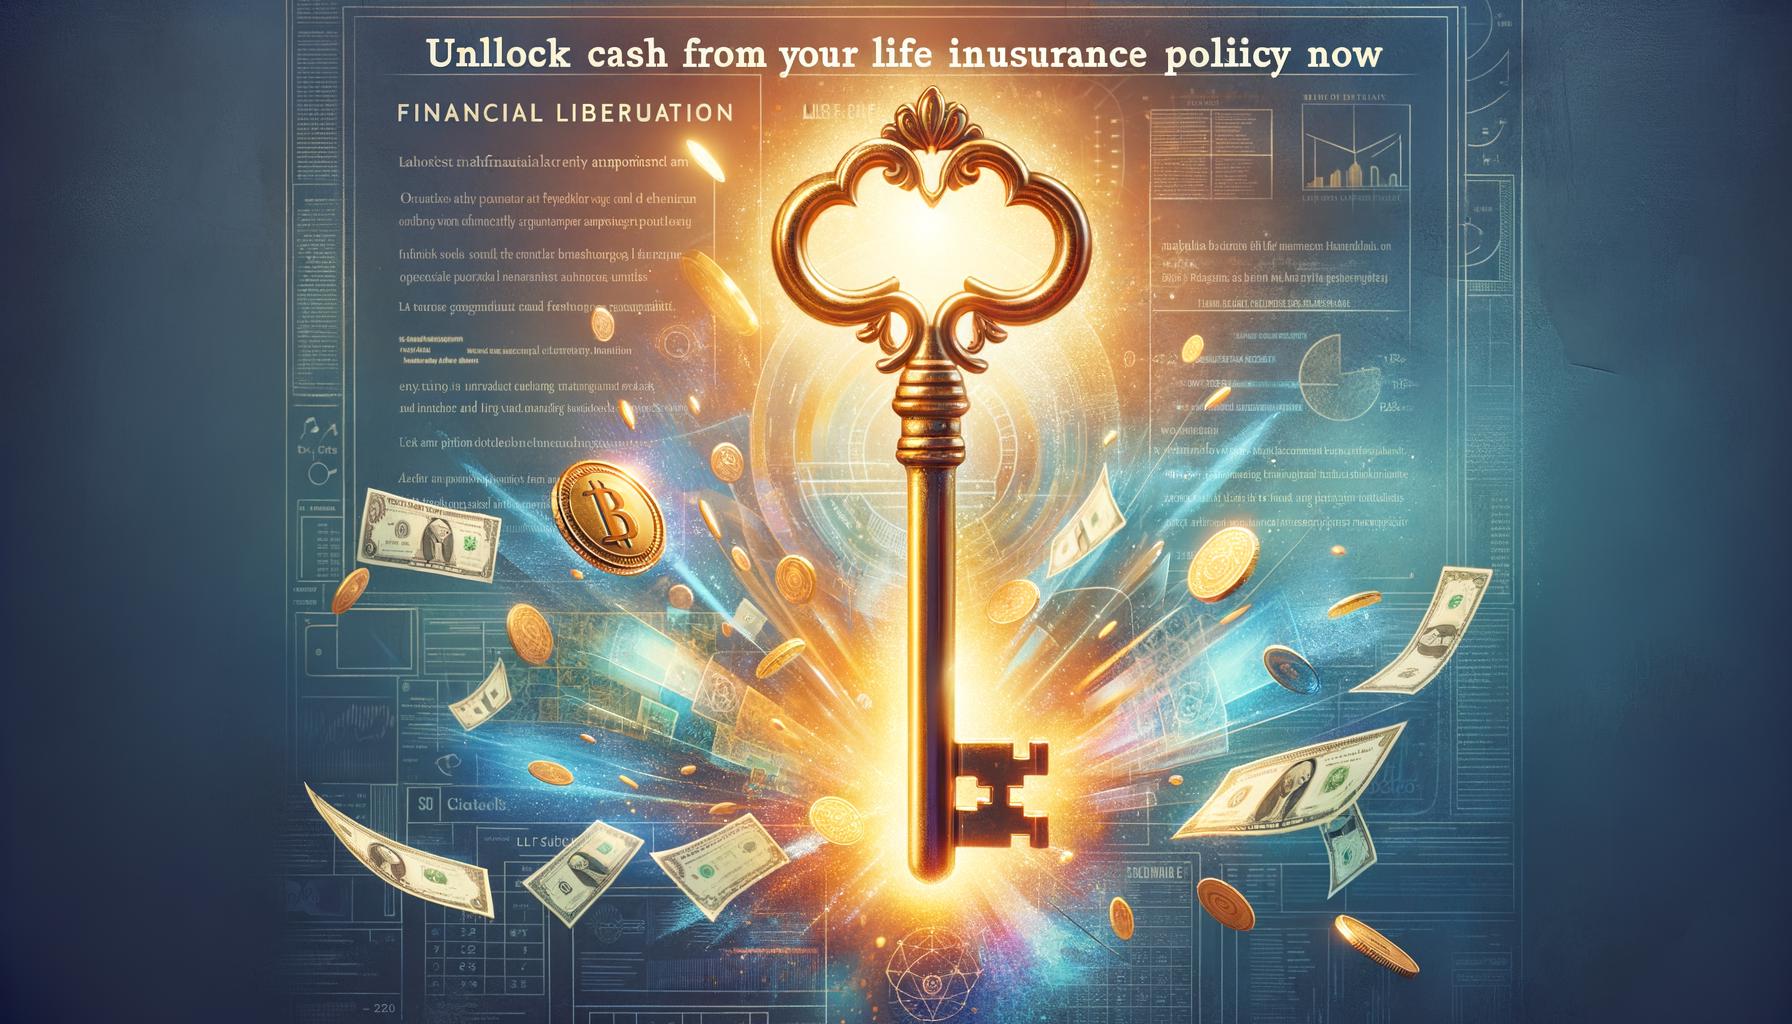 Banner image showing a golden key unlocking cash from life insurance, symbolizing financial relief and empowerment.